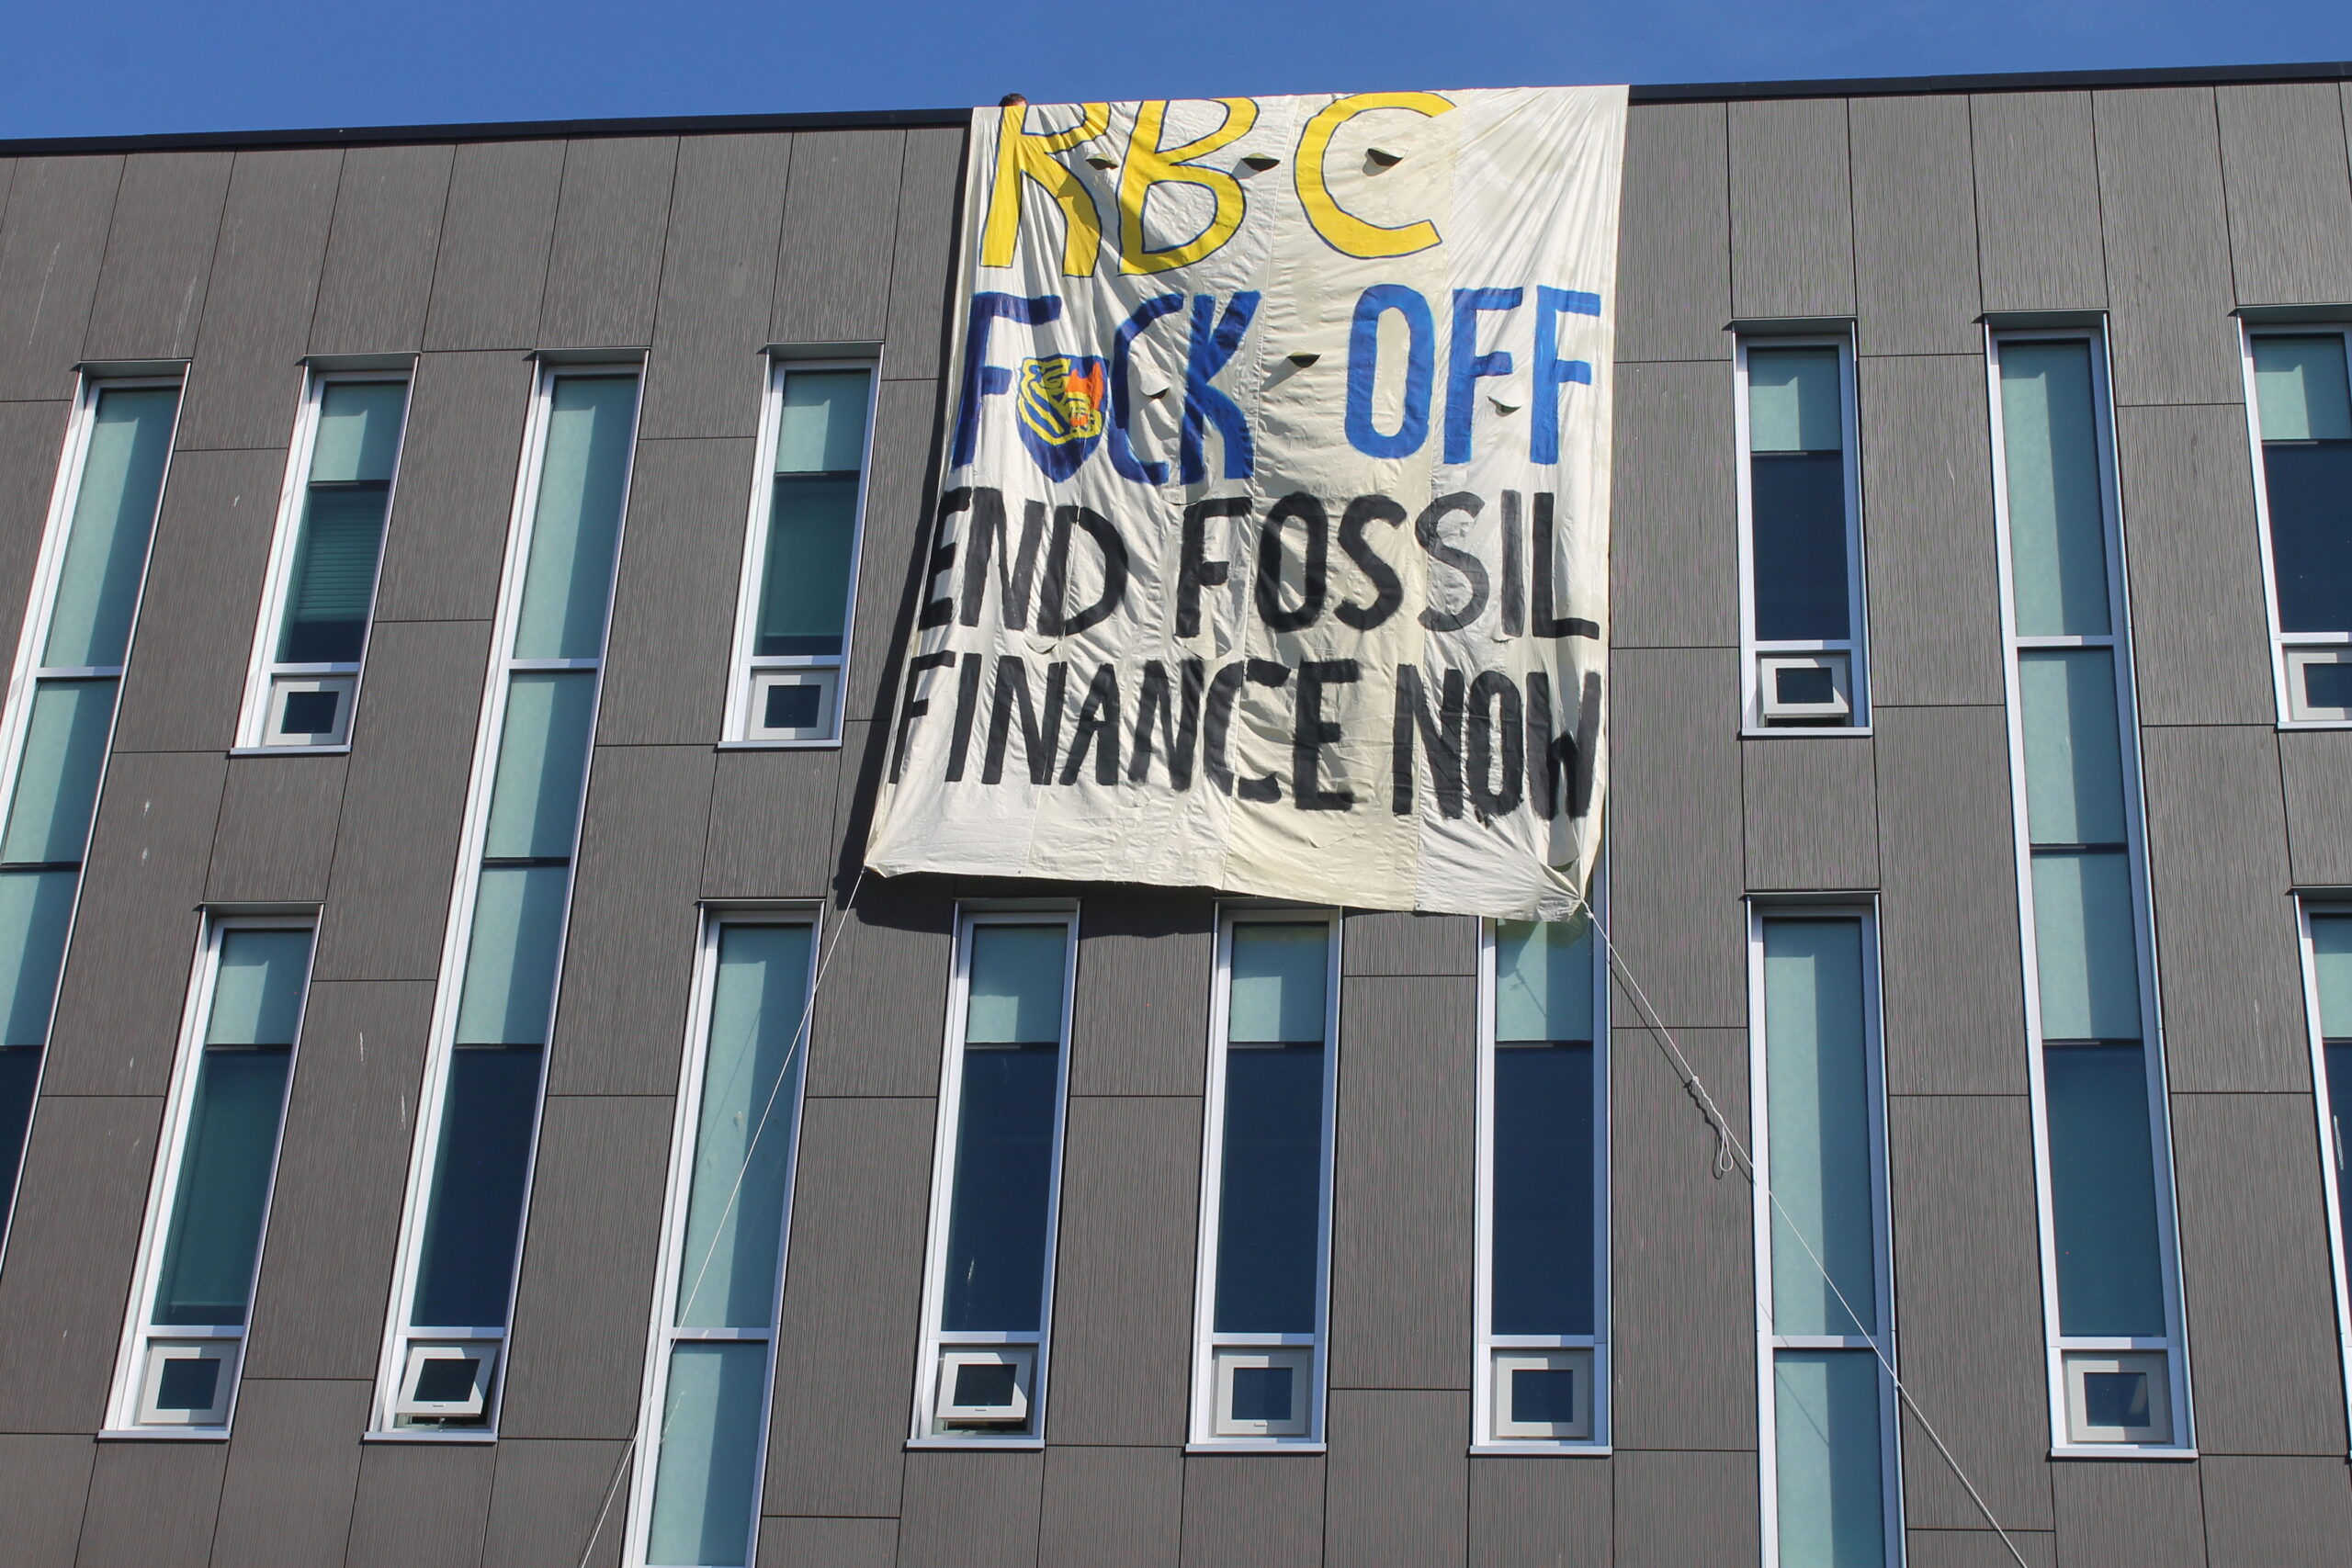 A grey university building with many long narrow windows. A strip of blue sky above. A large white banner hands over the roof covering more than a storey of the building. The banner reads "RBC FUCK OFF END FOSSIL FINANCE NOW."